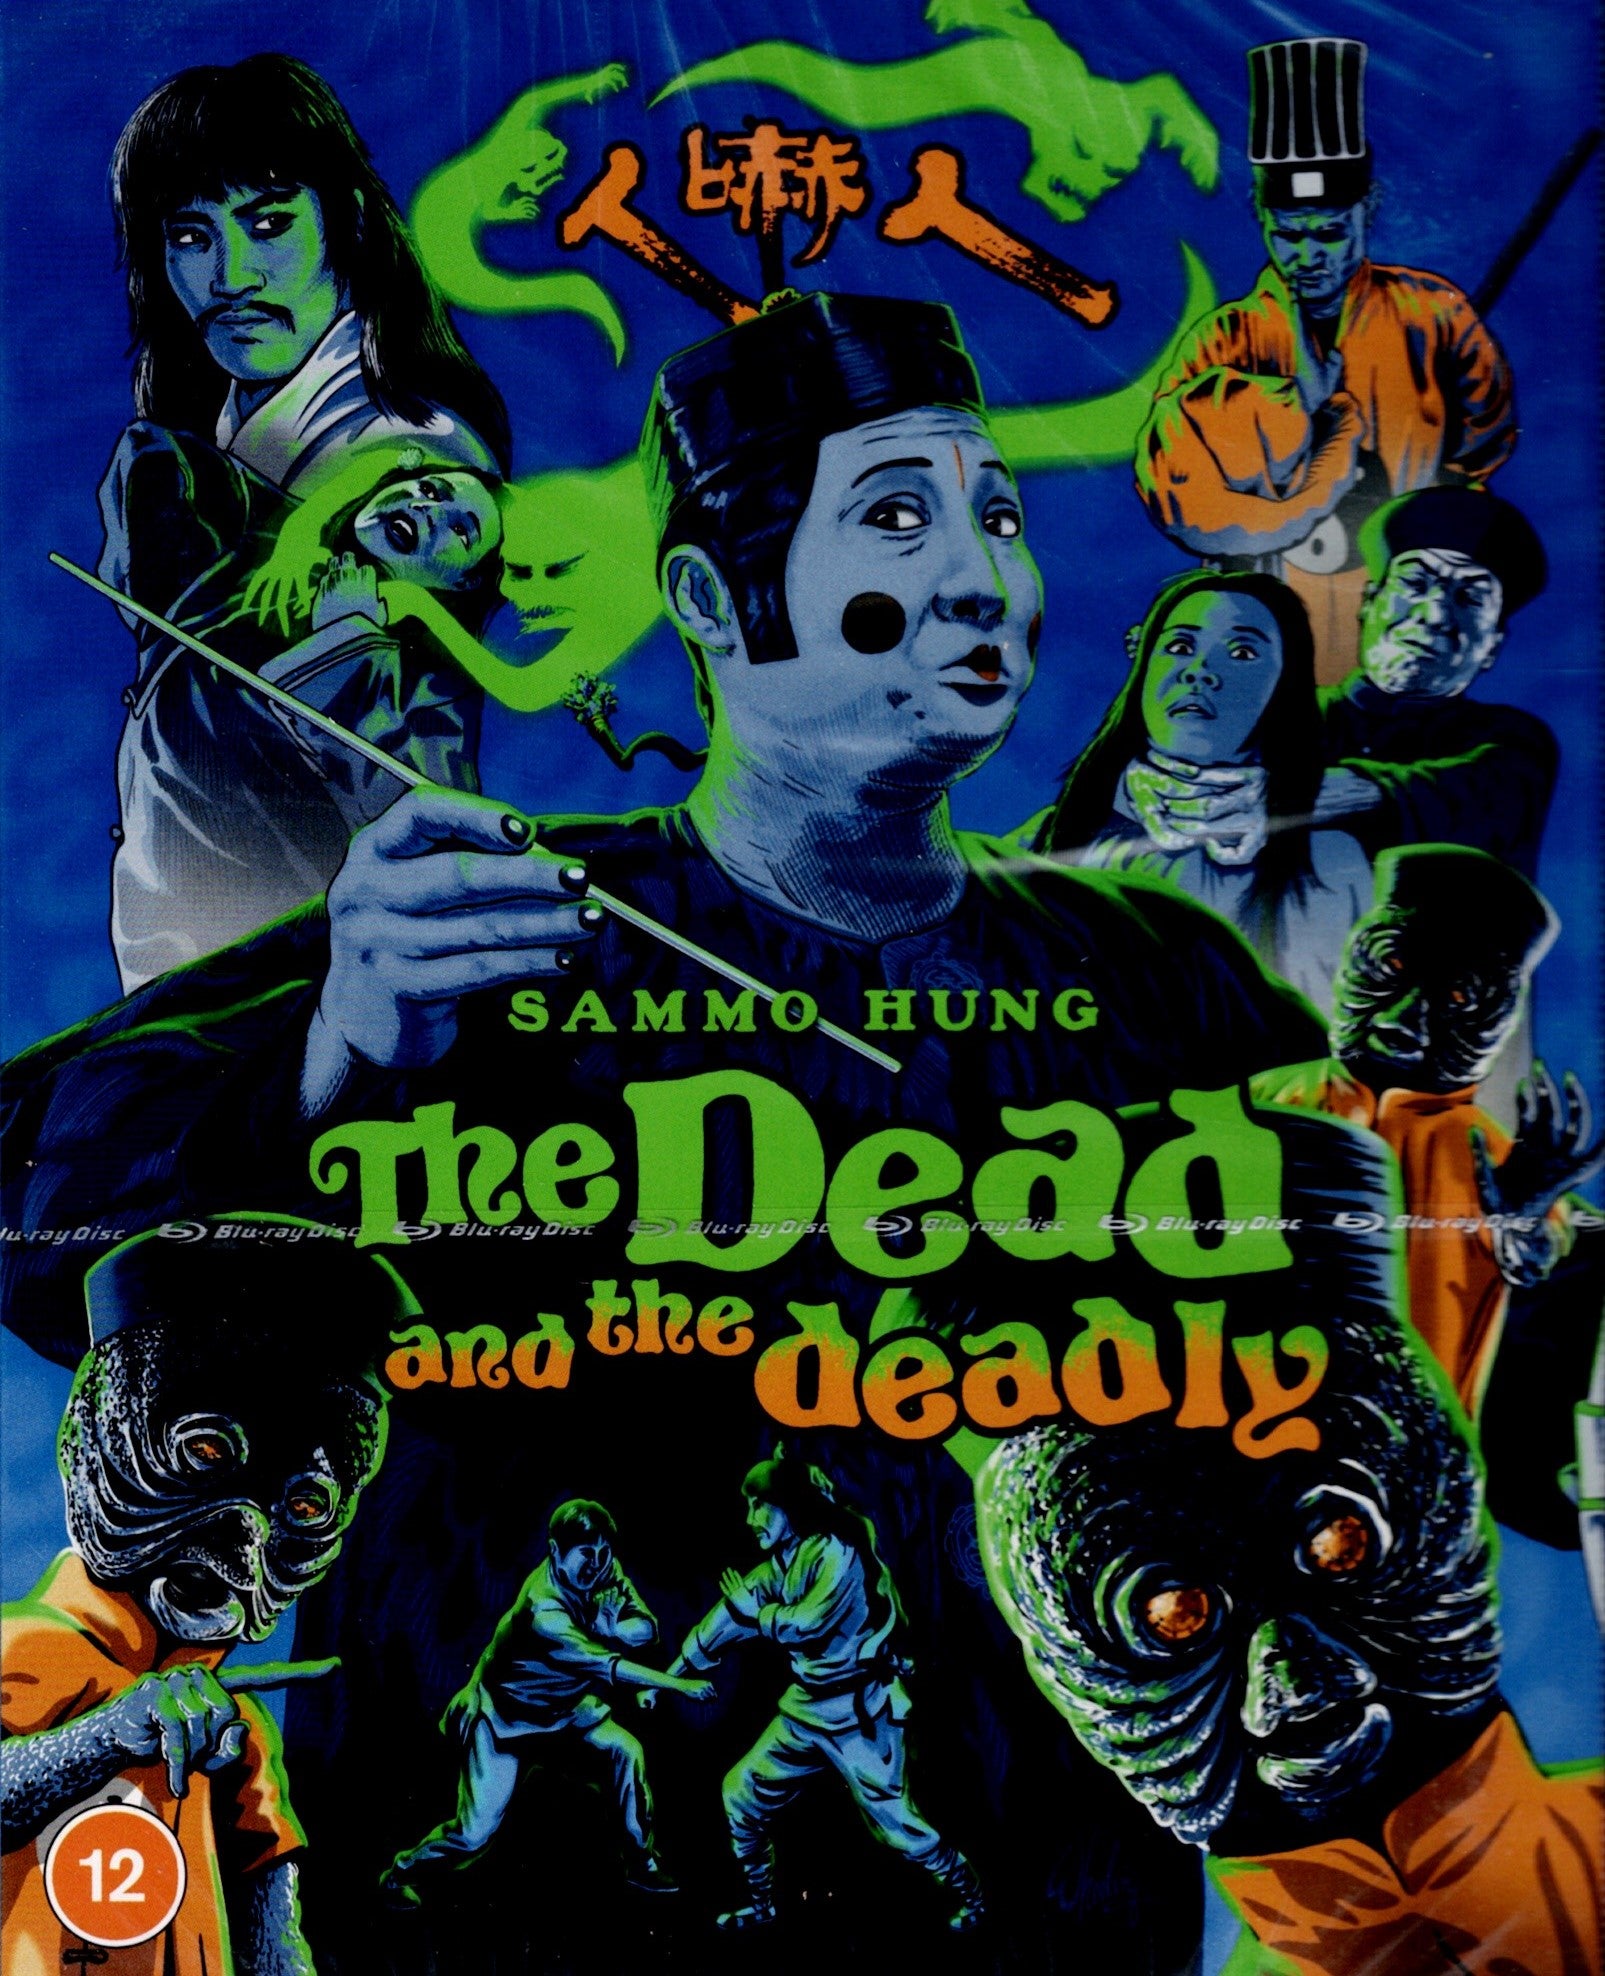 THE DEAD AND THE DEADLY (REGION B IMPORT - LIMITED EDITION) BLU-RAY